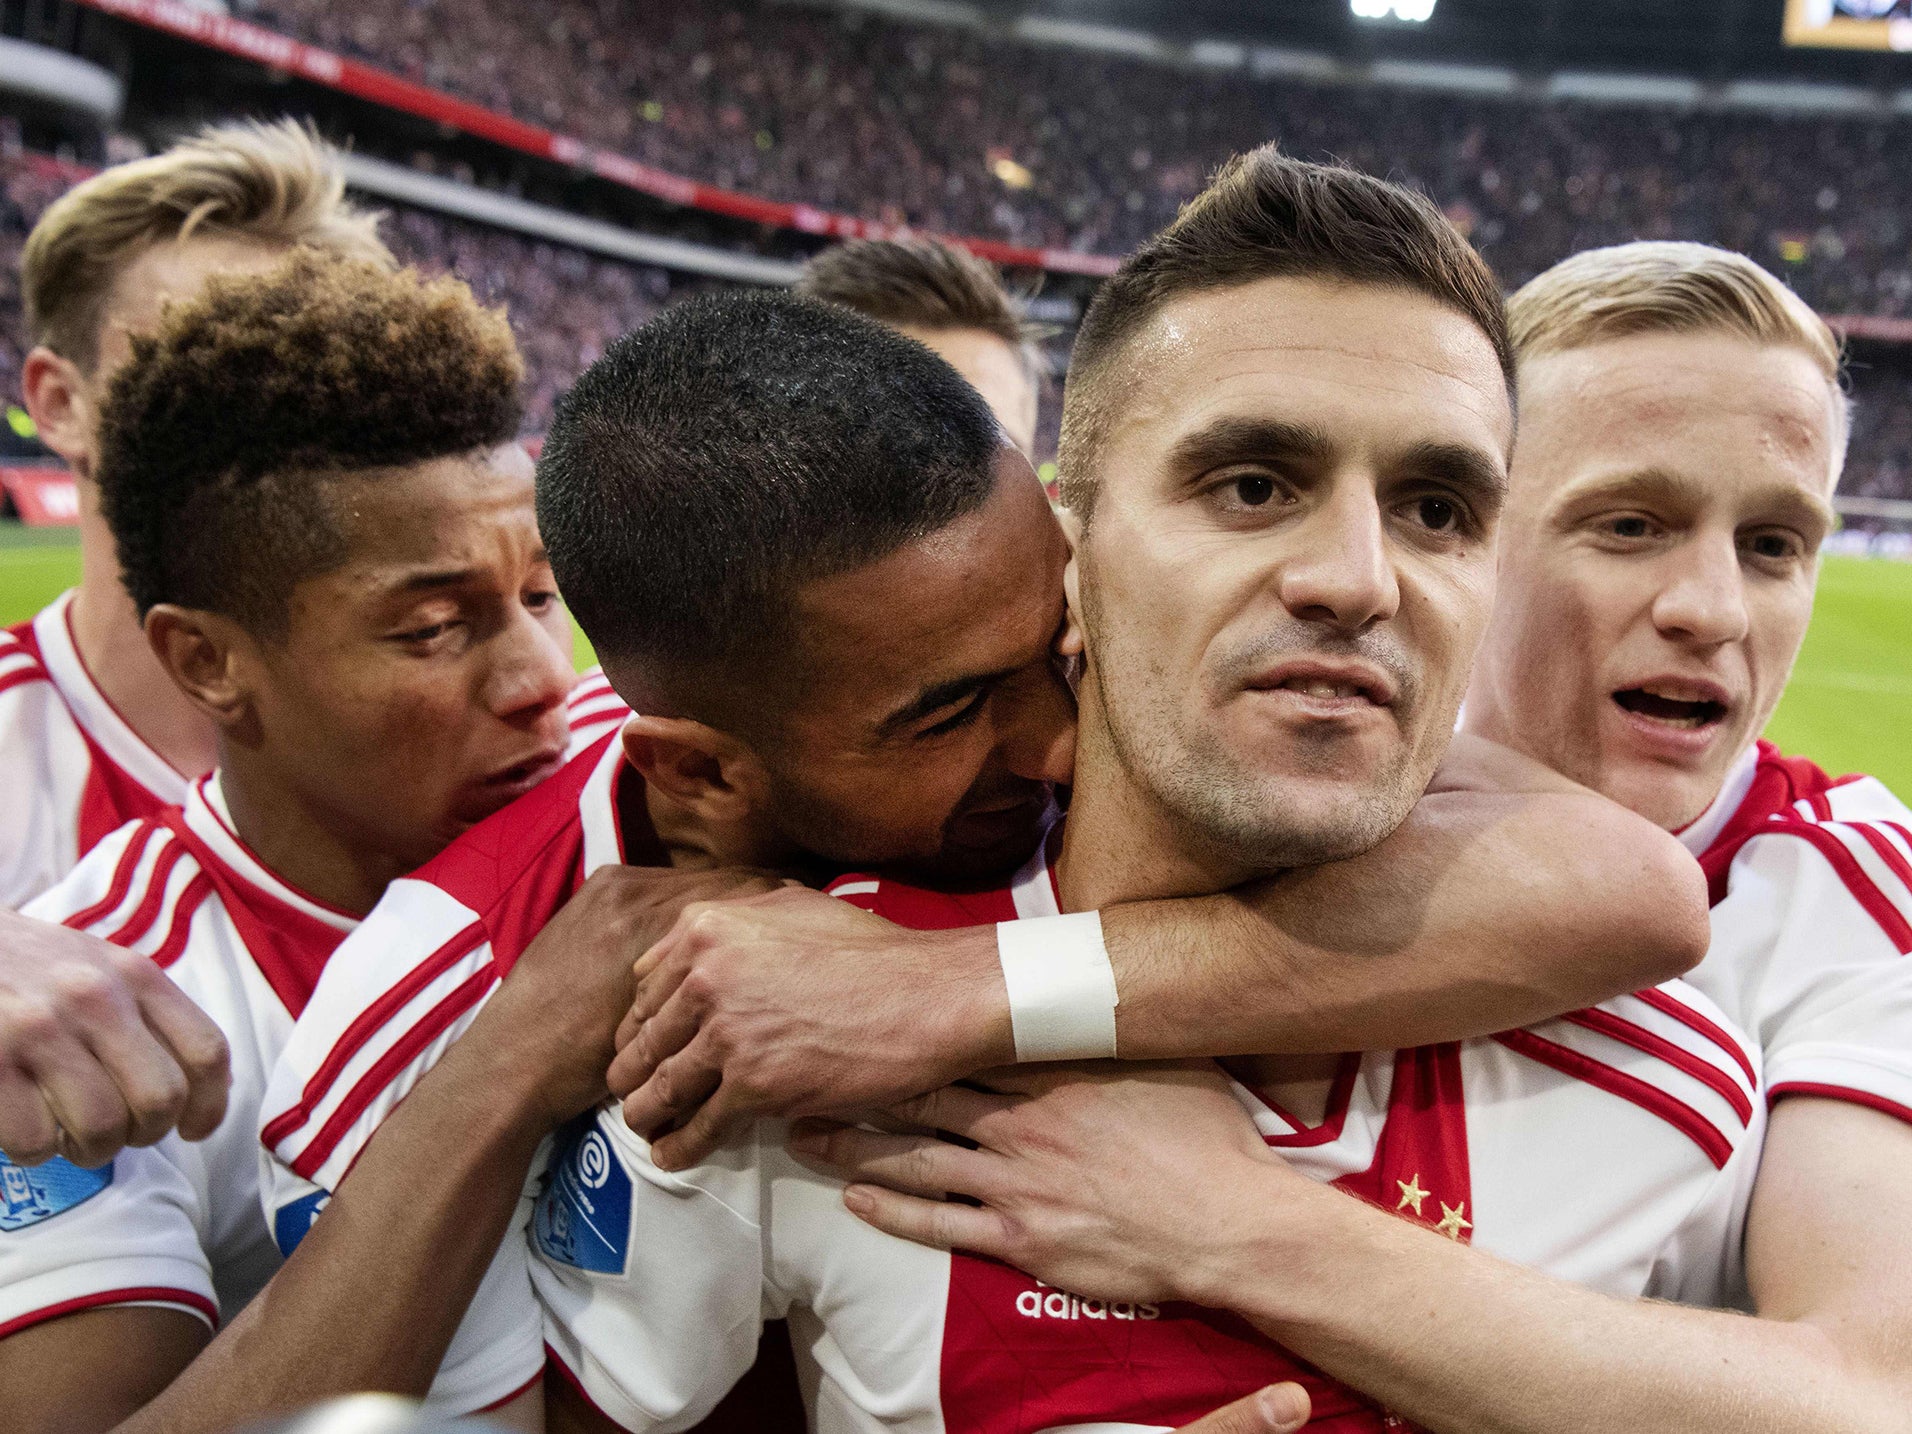 Dusan Tadic has excelled for Ajax this season